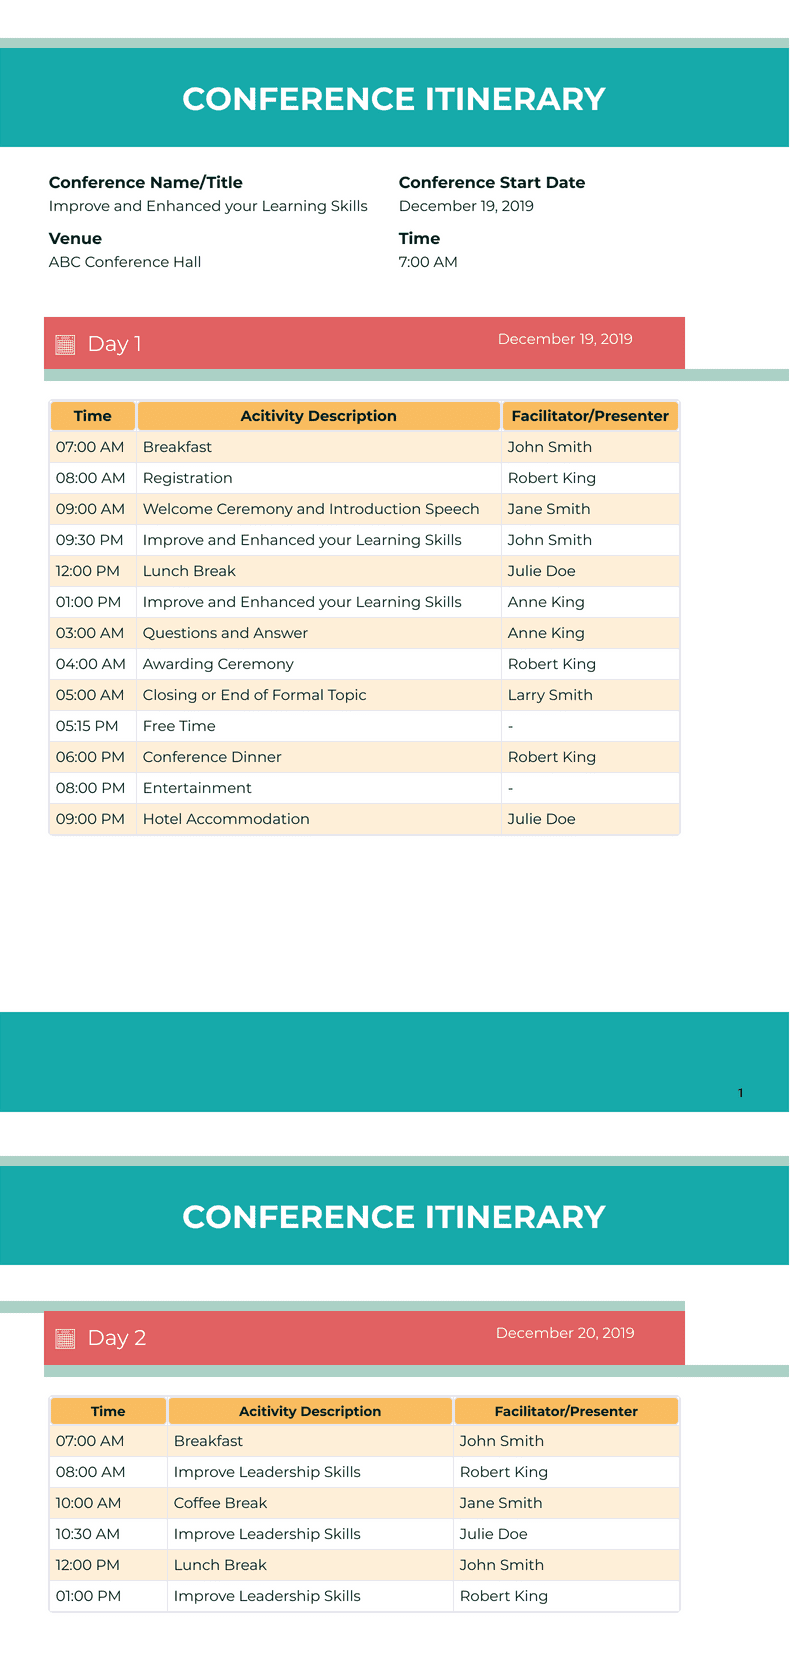 PDF Templates: Conference Itinerary Template